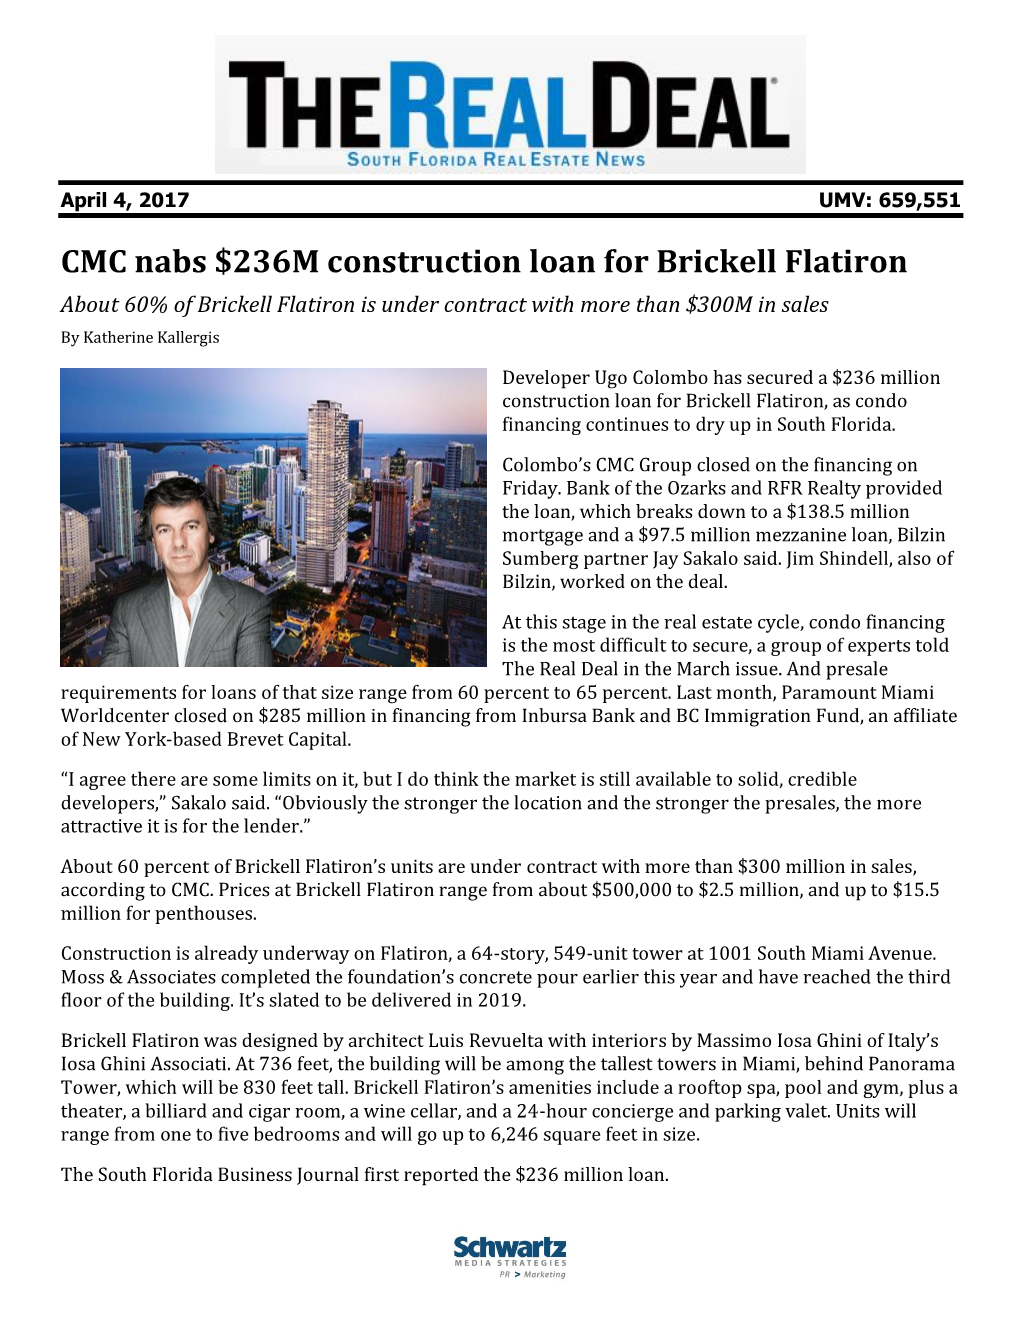 CMC Nabs $236M Construction Loan for Brickell Flatiron About 60% of Brickell Flatiron Is Under Contract with More Than $300M in Sales by Katherine Kallergis